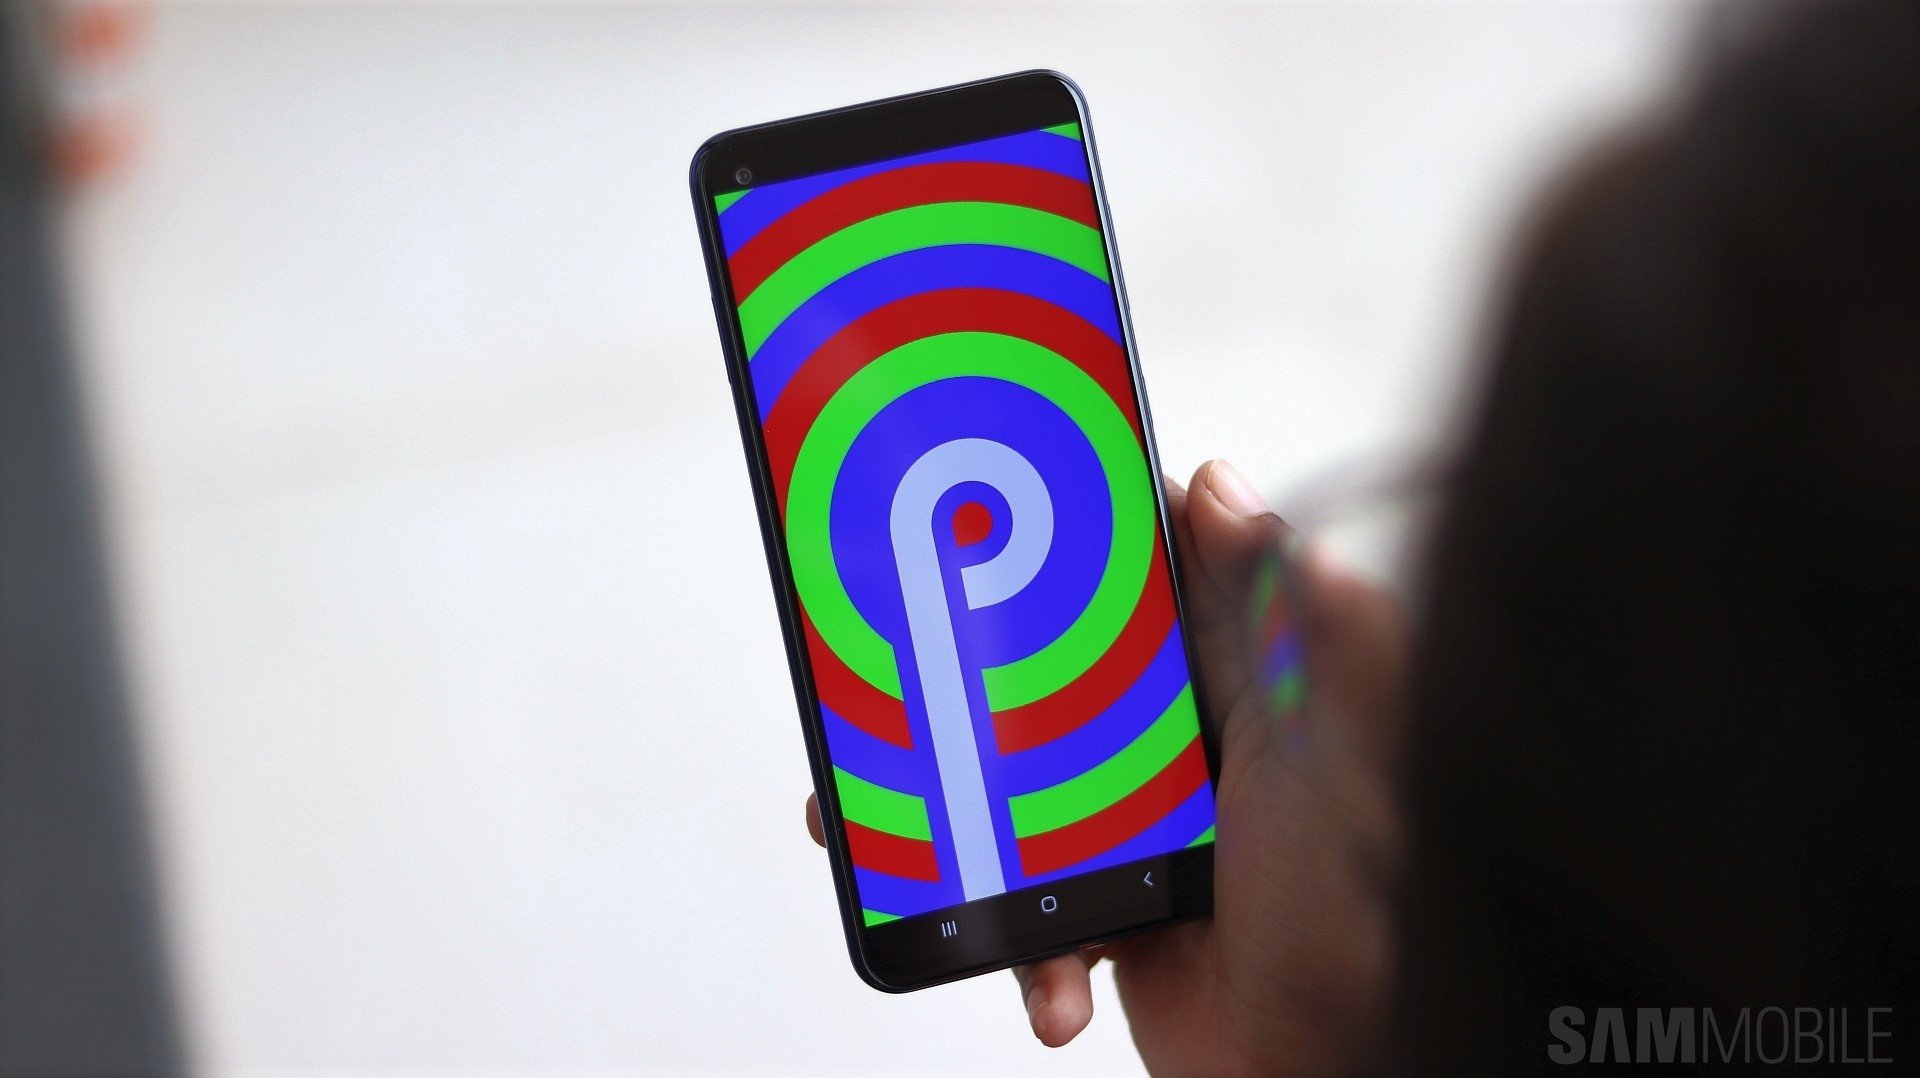 Samsung Galaxy M40 Running Android Pie Certified by Wi-Fi Alliance